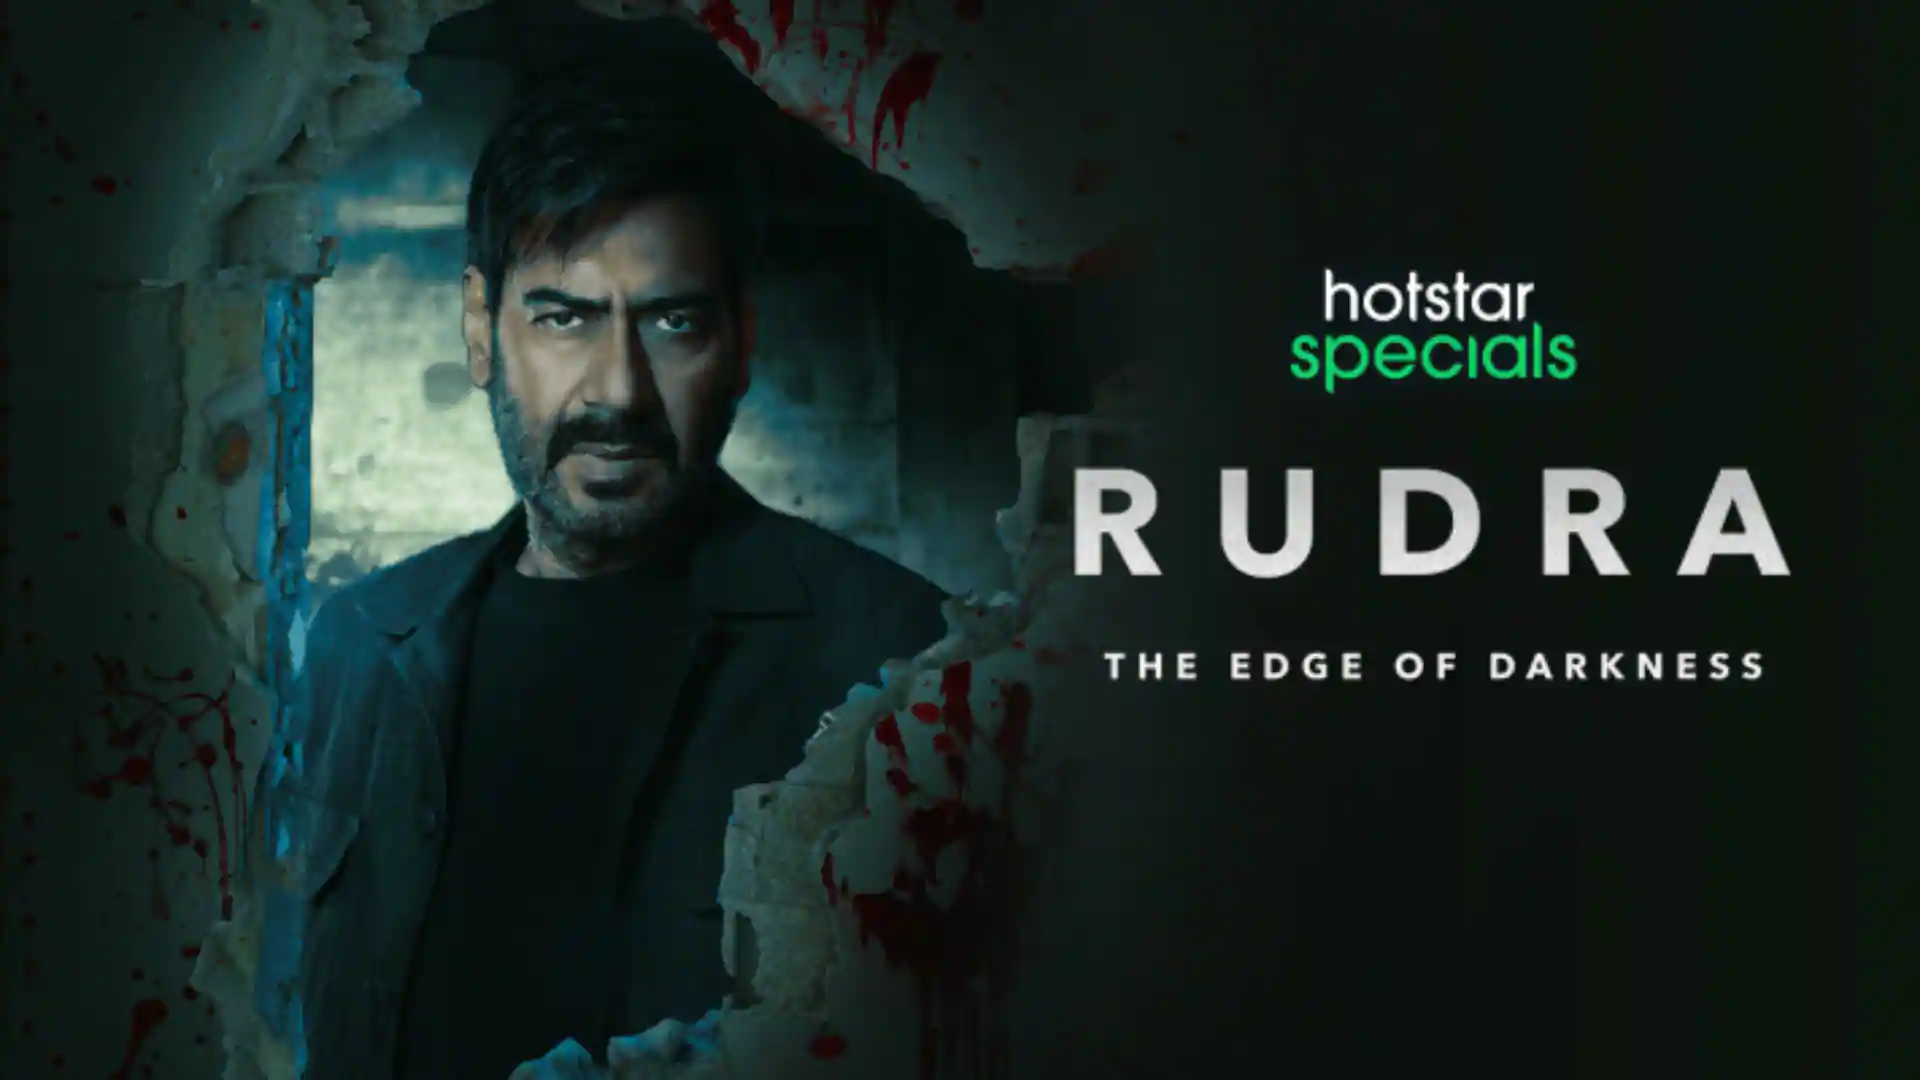 RUDRA - THE EDGE OF DARKNESS